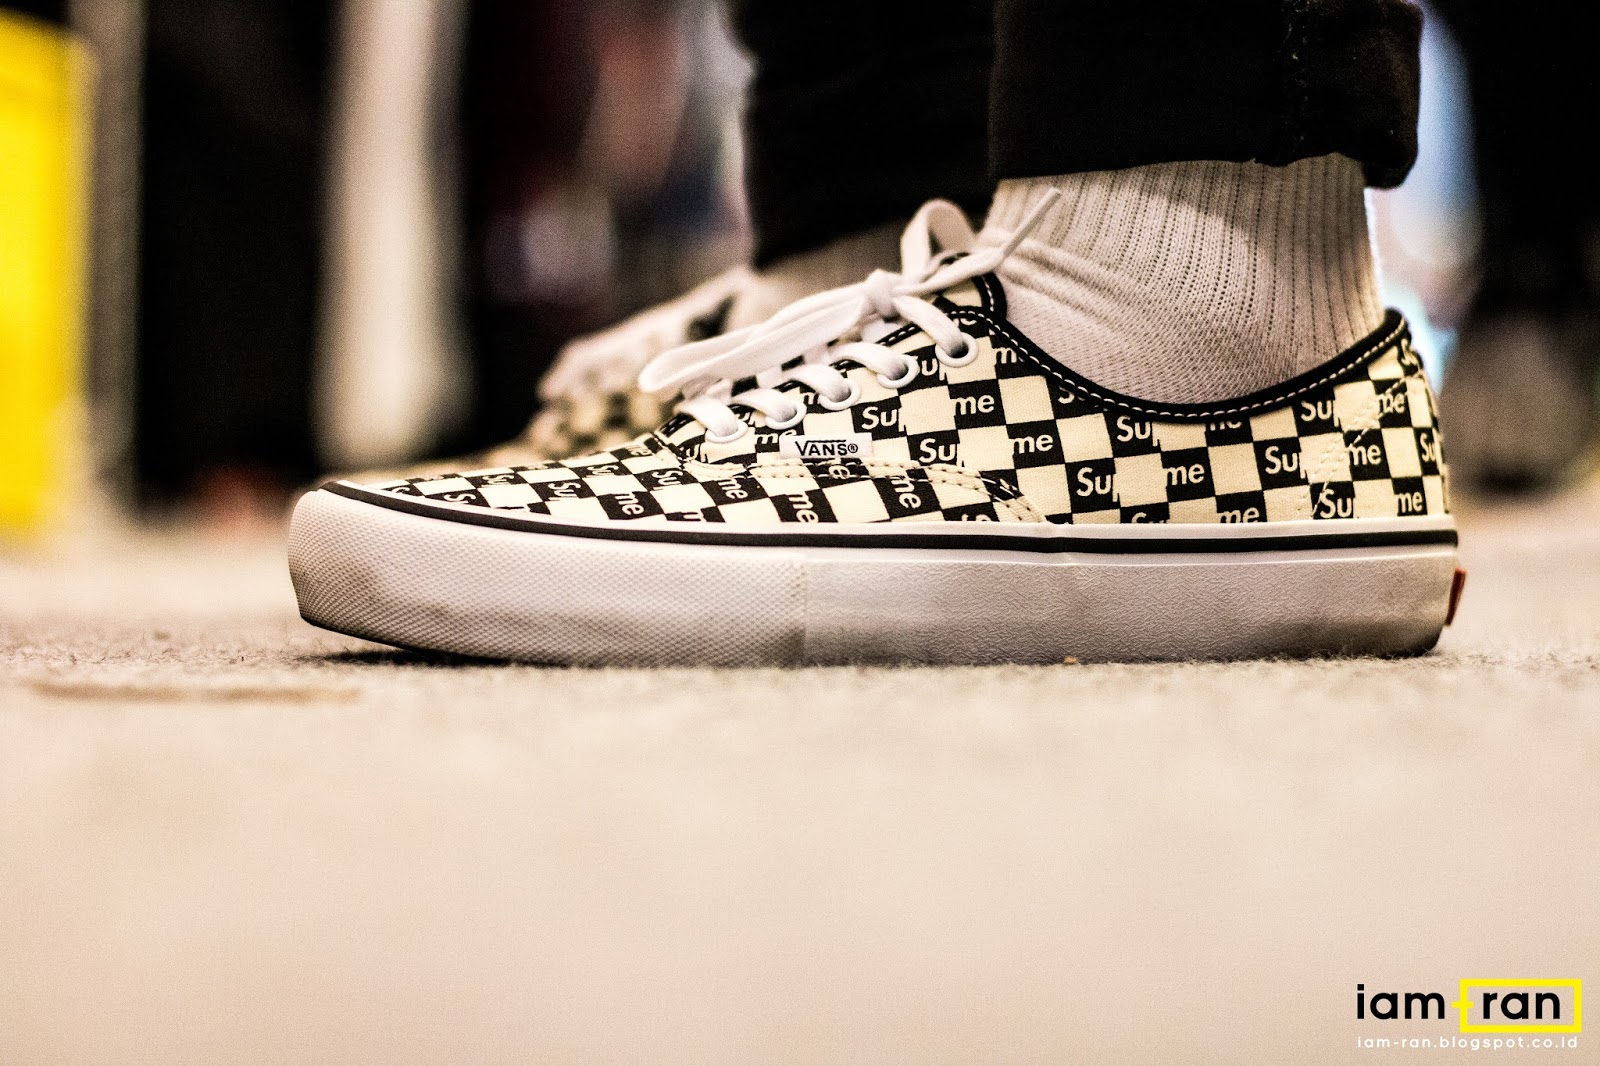 vans checkerboard authentic on feet